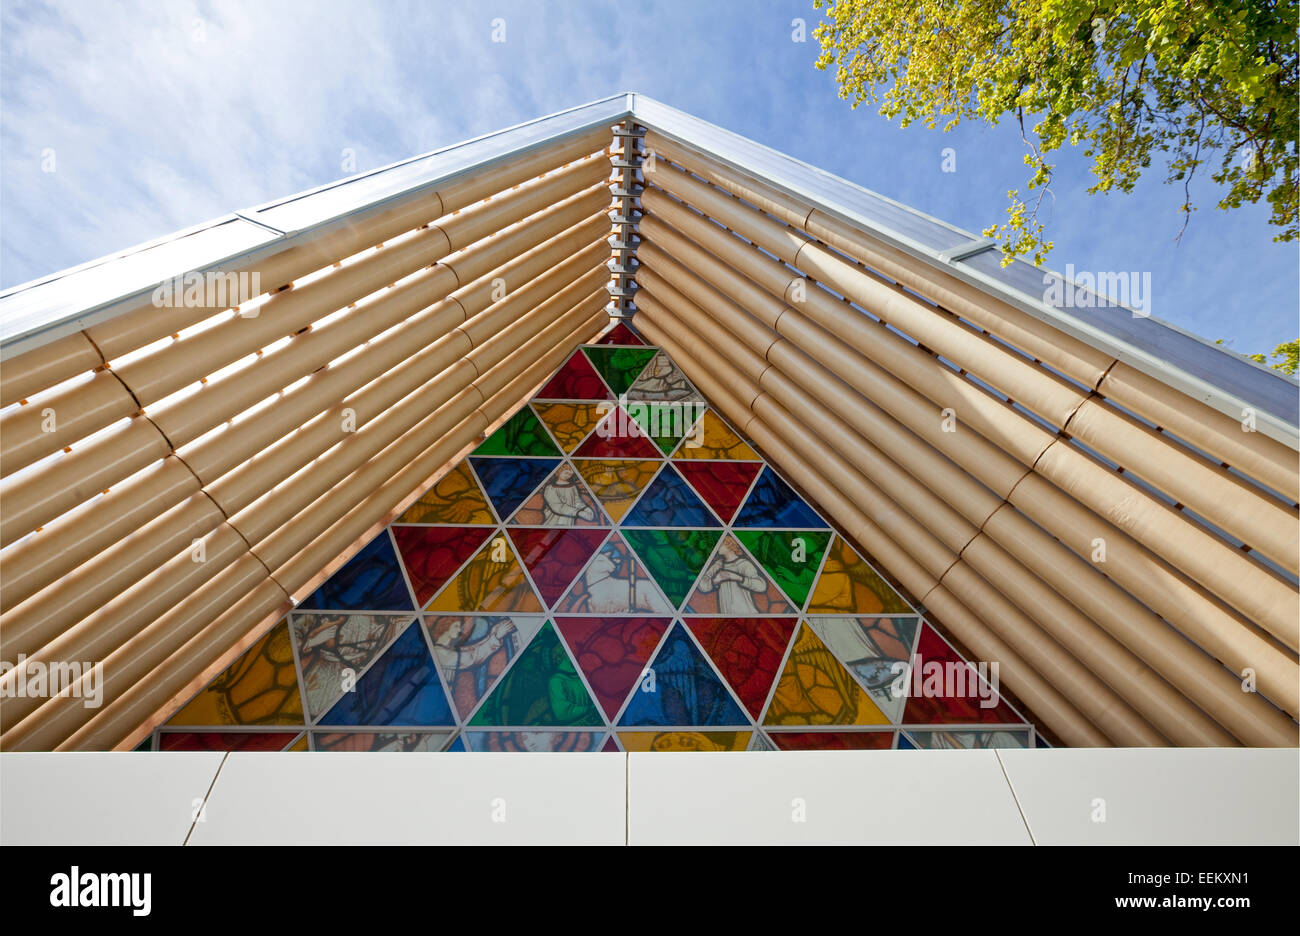 Christchurch Transitional (Cardboard) Cathedral, Christchurch, New Zealand Stock Photo